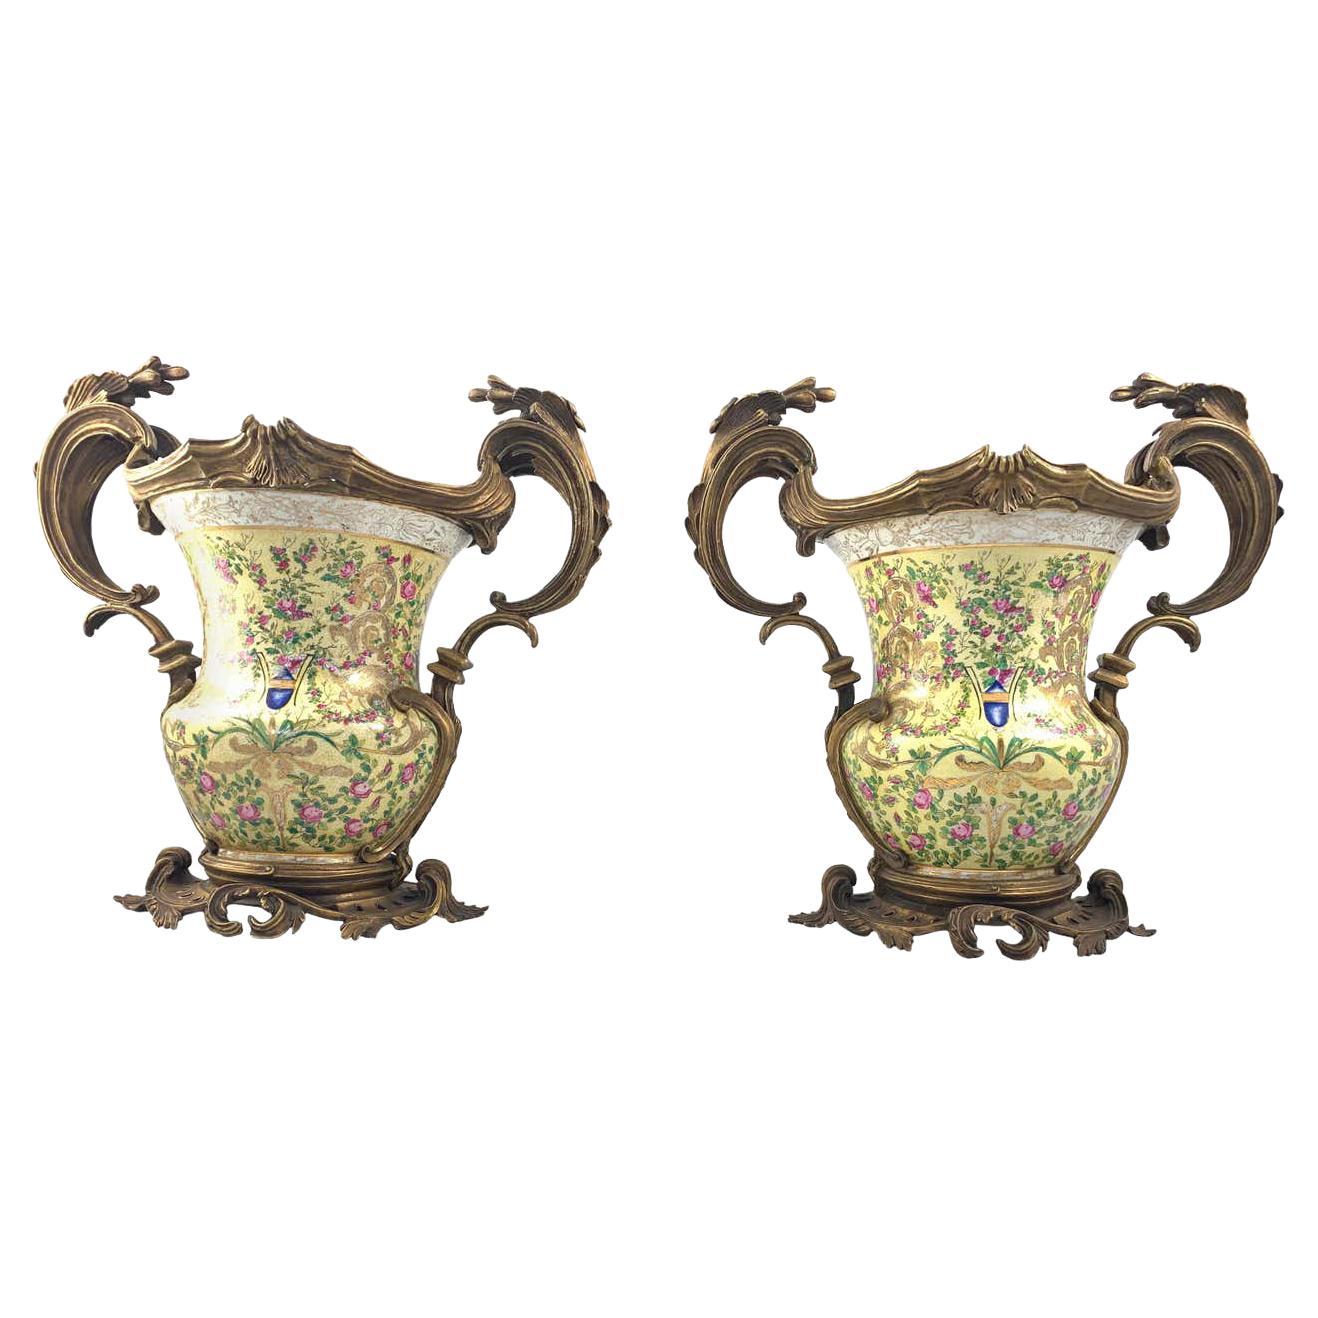 20th Century Pair of French Porcelain and Ormolu-Mounted Twin Handled Urns